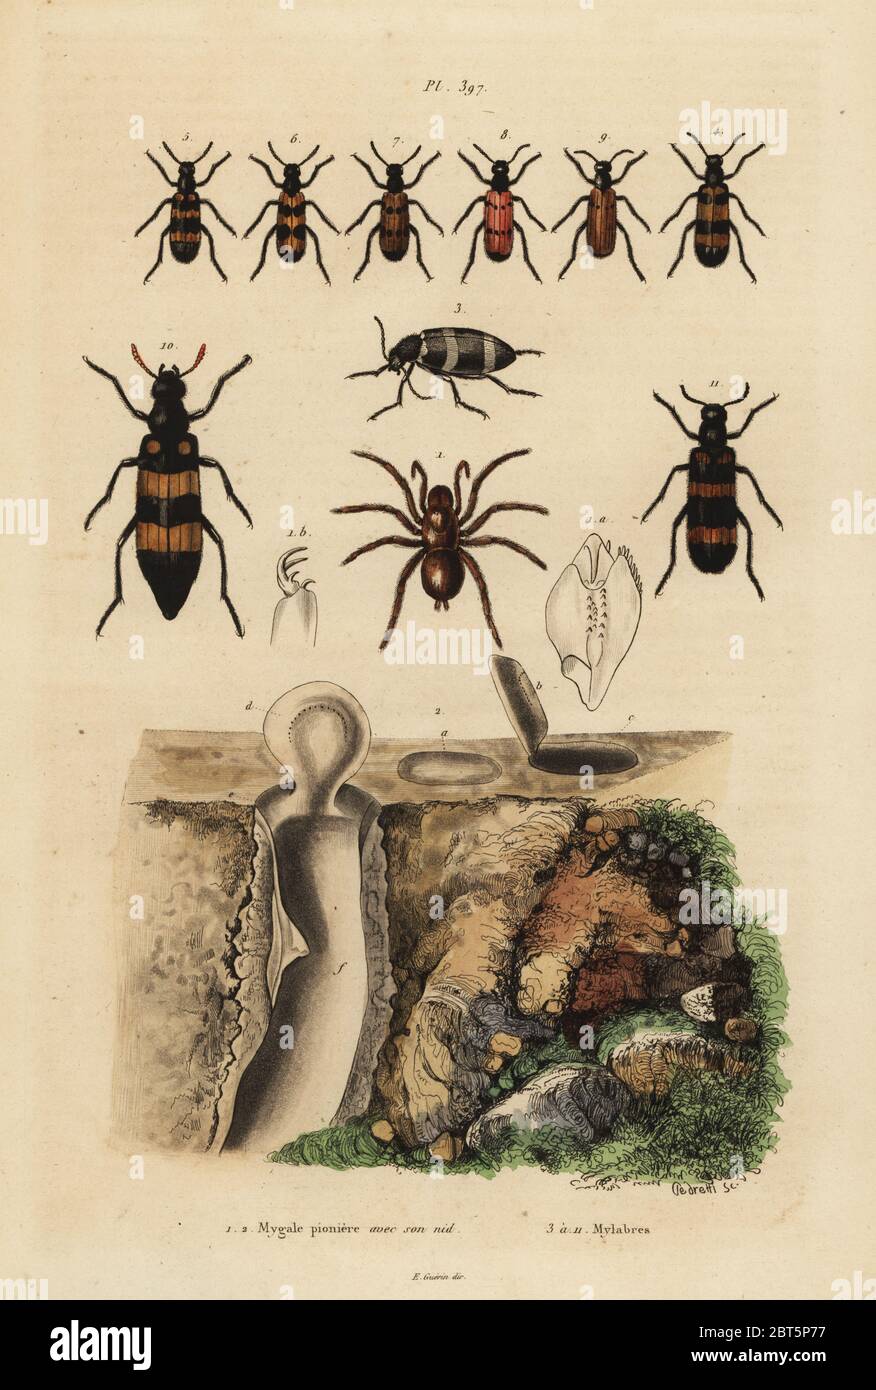 Mygalomorph trapdoor spider and its nest, and beetles, Mylabris species. Mygale pioniere et son nid, Mylabres. Handcoloured steel engraving by Pedretti from Felix-Edouard Guerin-Meneville's Dictionnaire Pittoresque d'Histoire Naturelle (Picturesque Dictionary of Natural History), Paris, 1834-39. Stock Photo